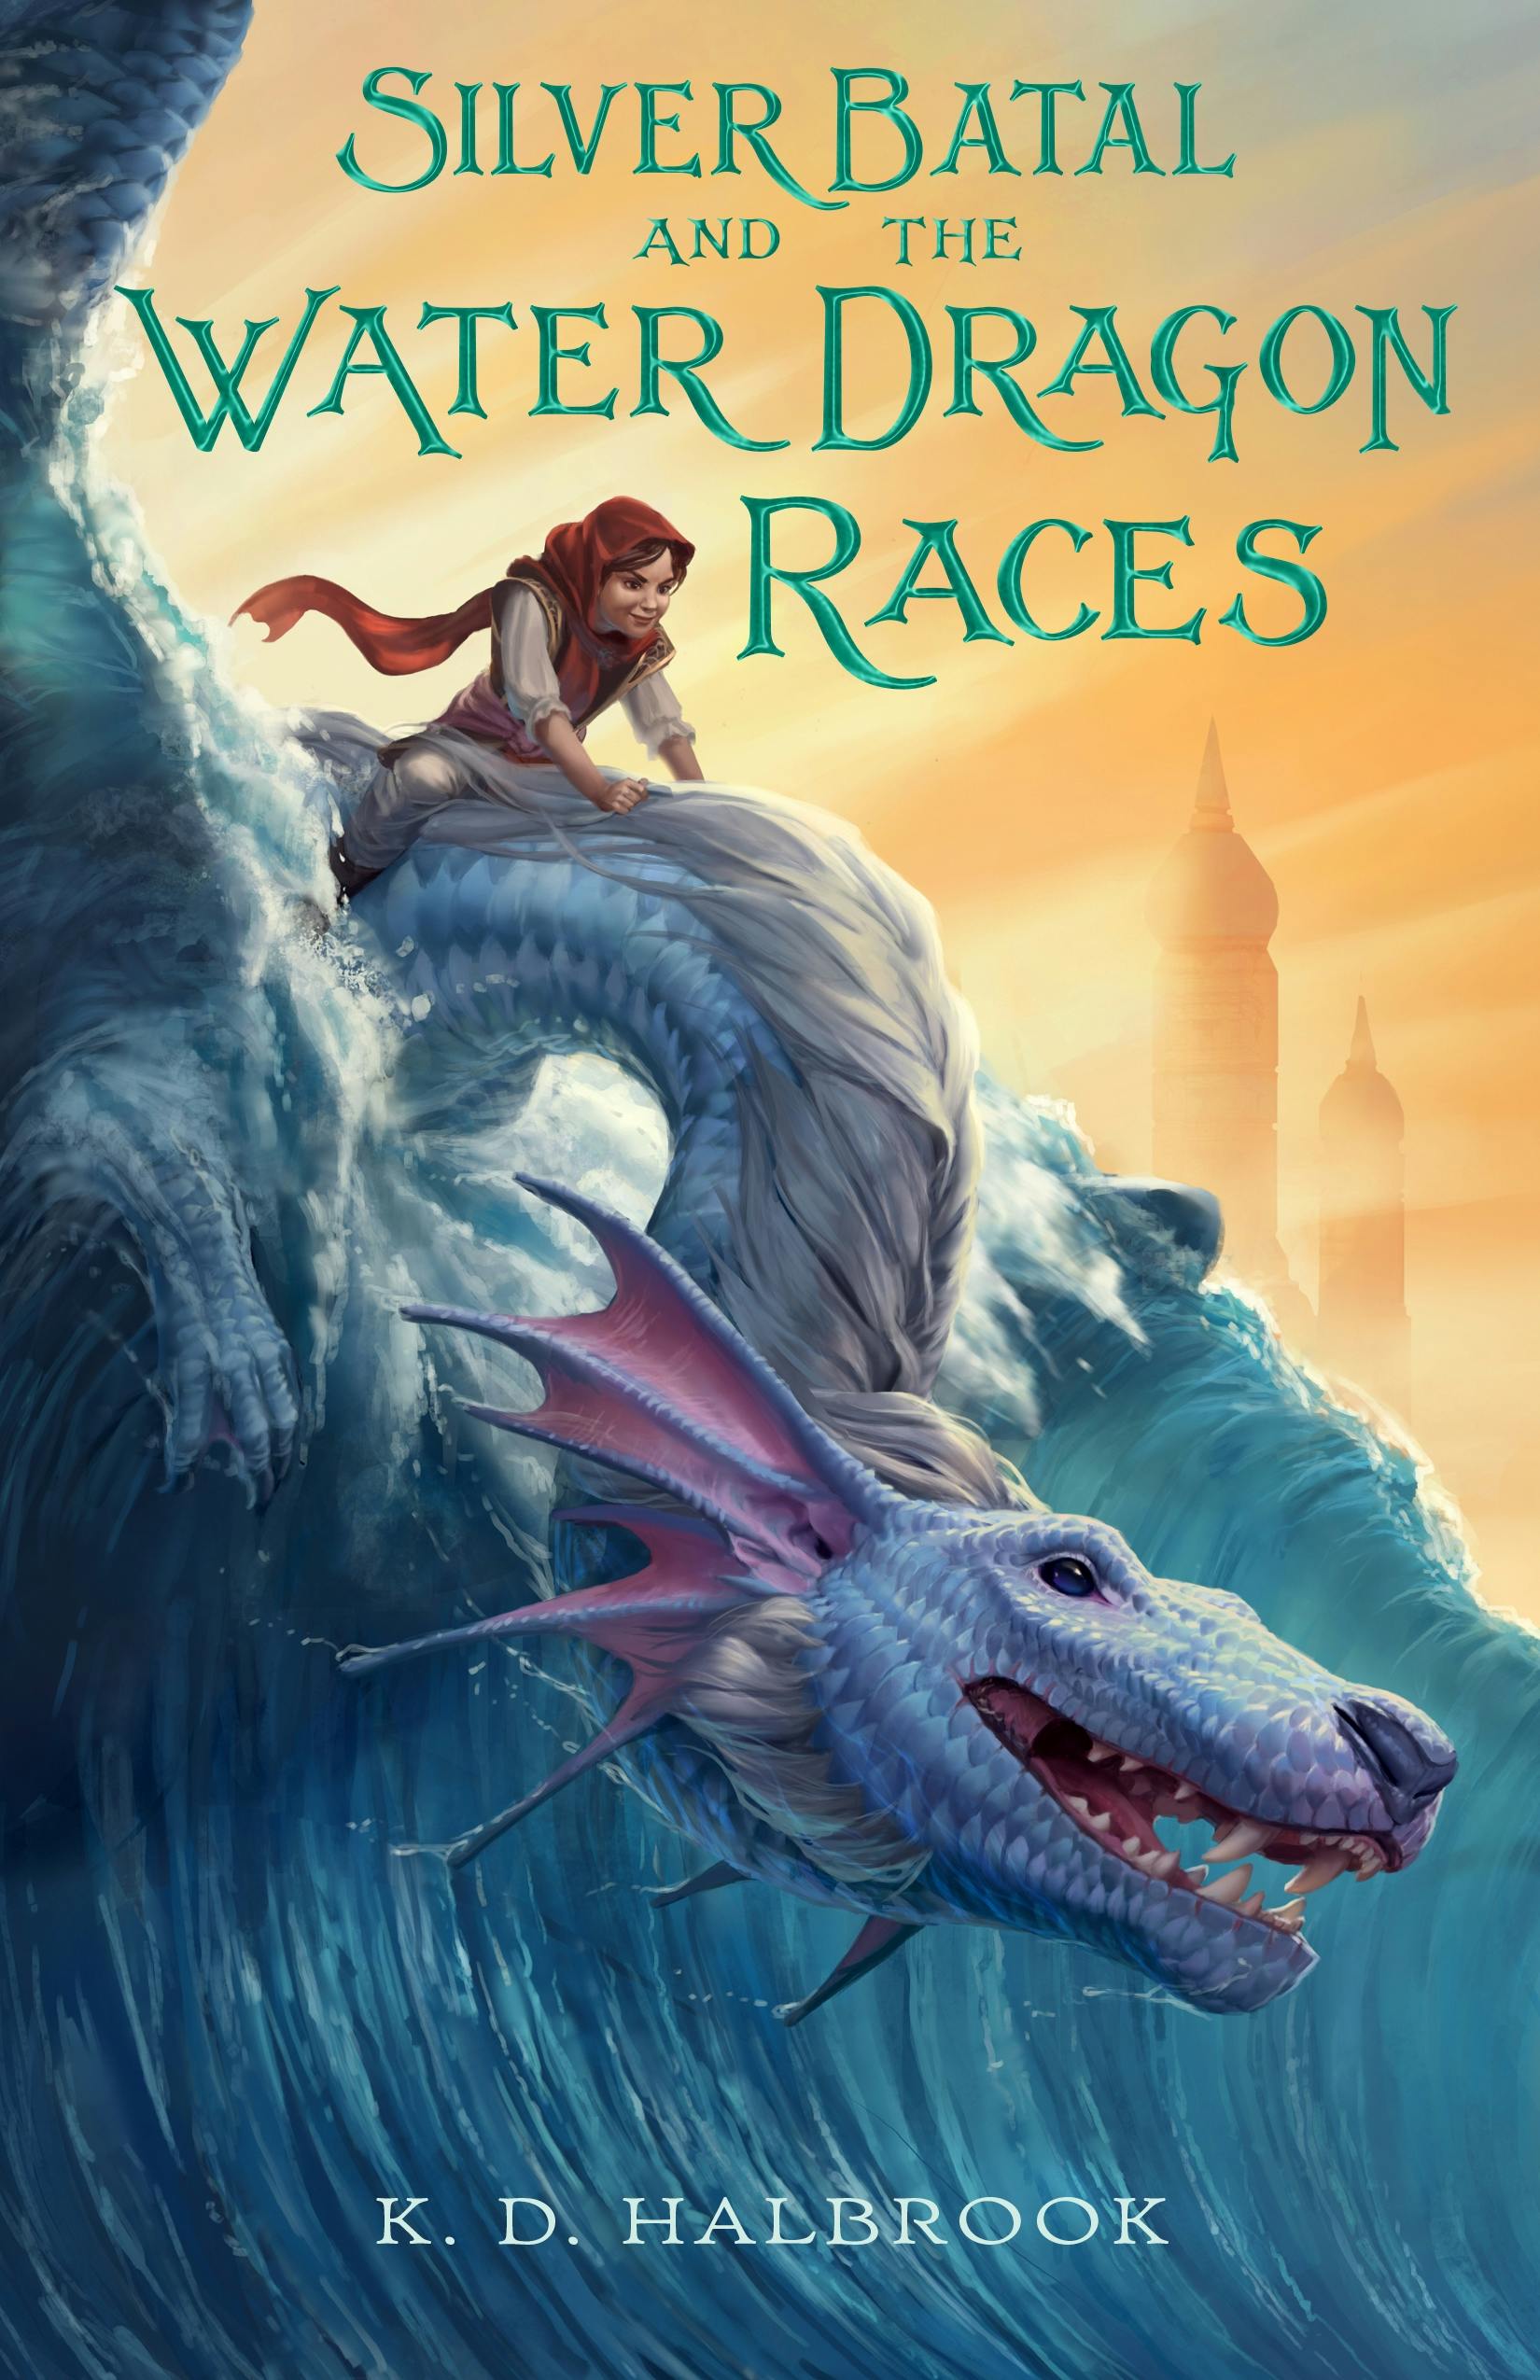 Image of Silver Batal and the Water Dragon Races